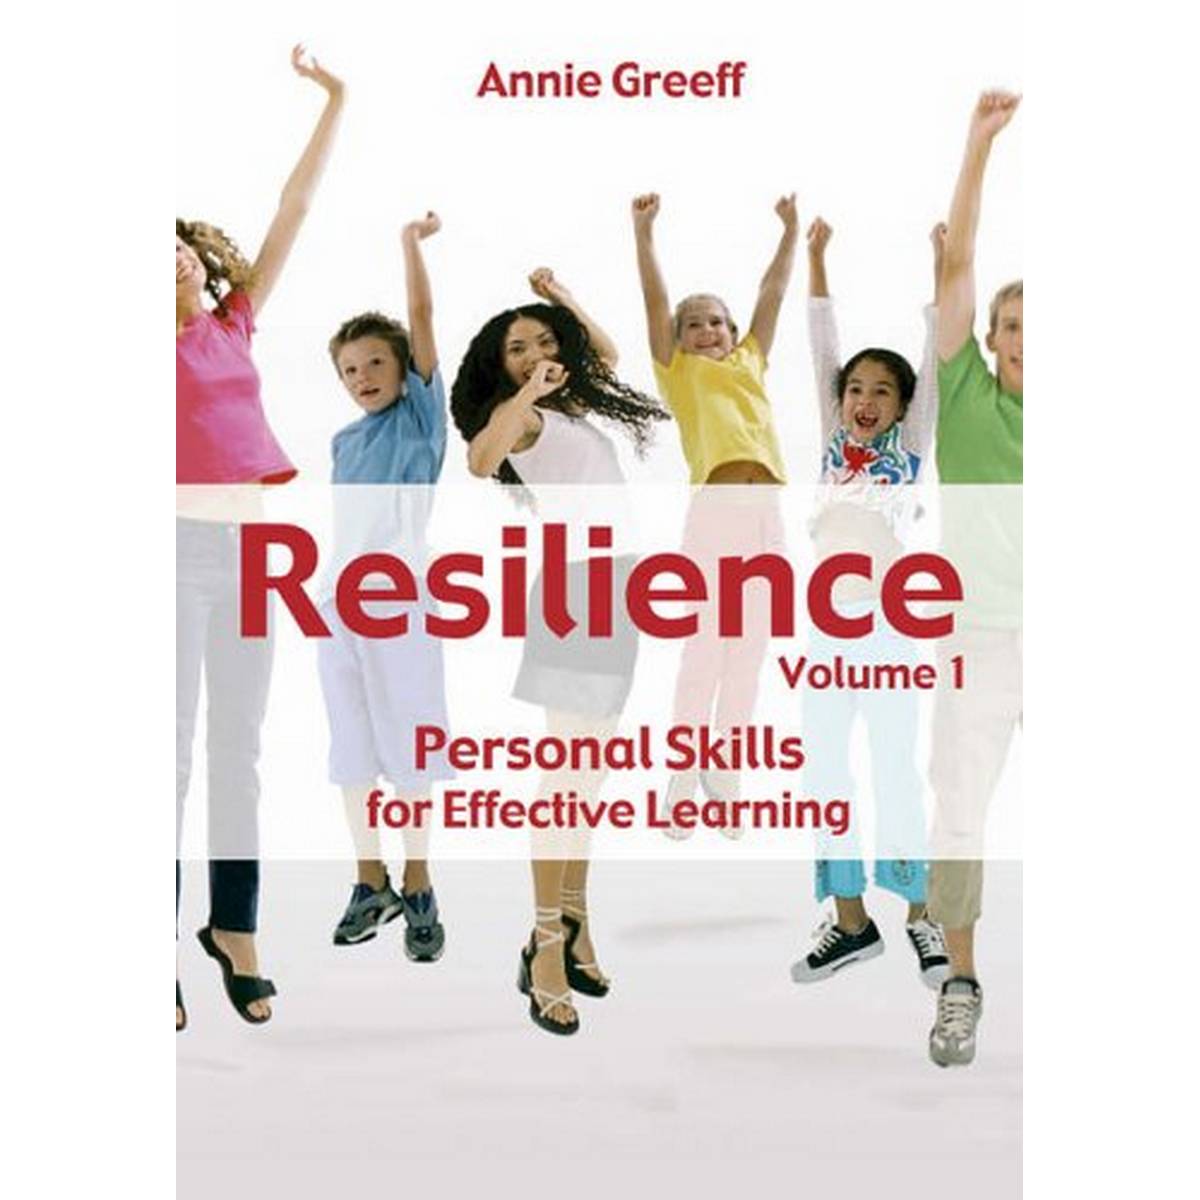 Resilience Volume 1 - Personal Skills for Effective Learning